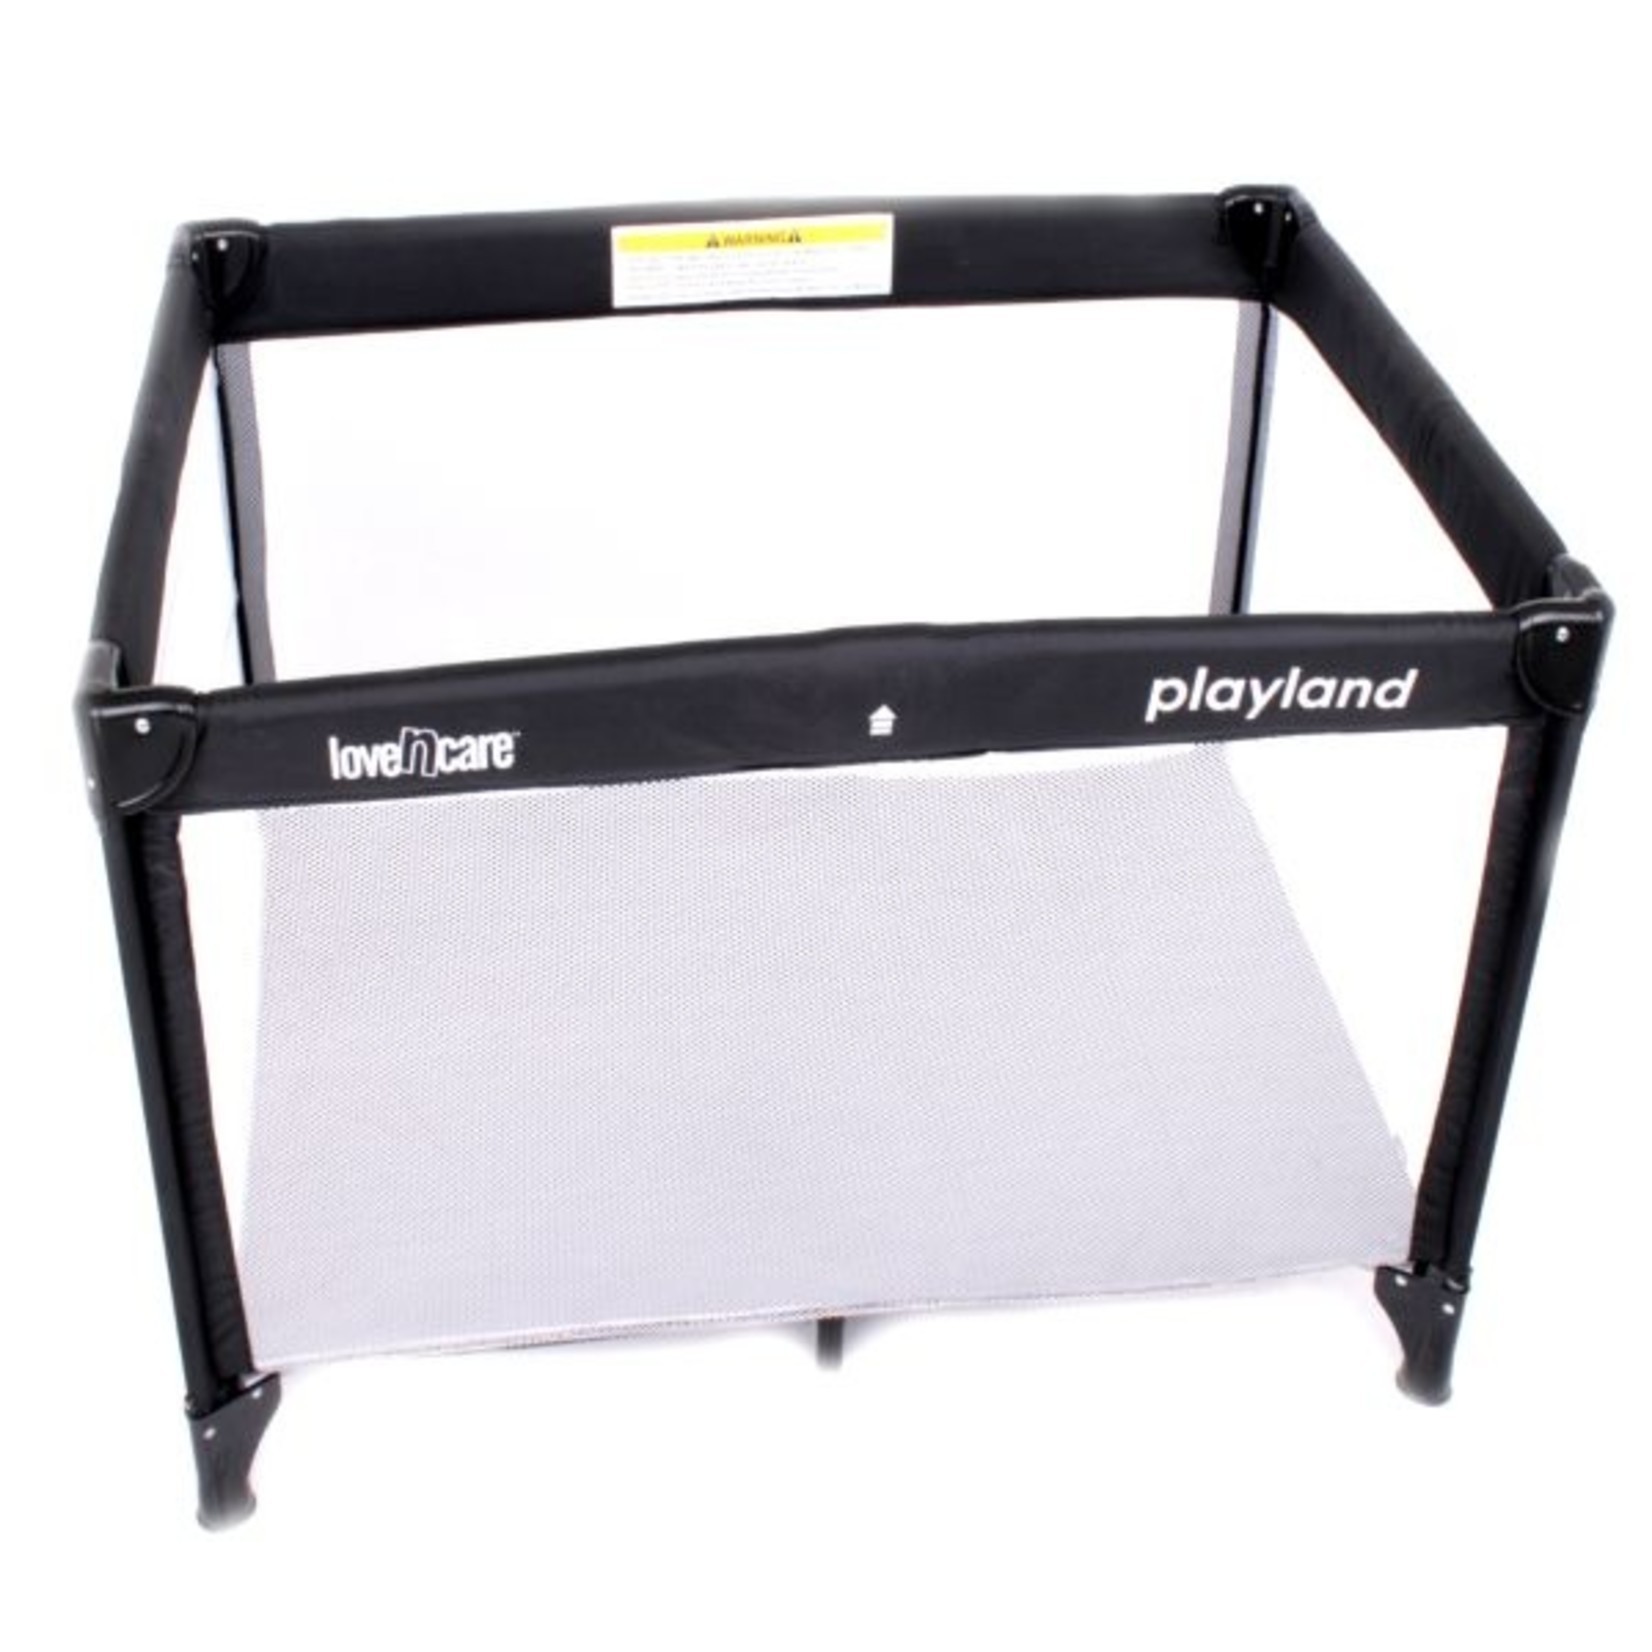 Love n care PLAYLAND TRAVEL COT – NERO